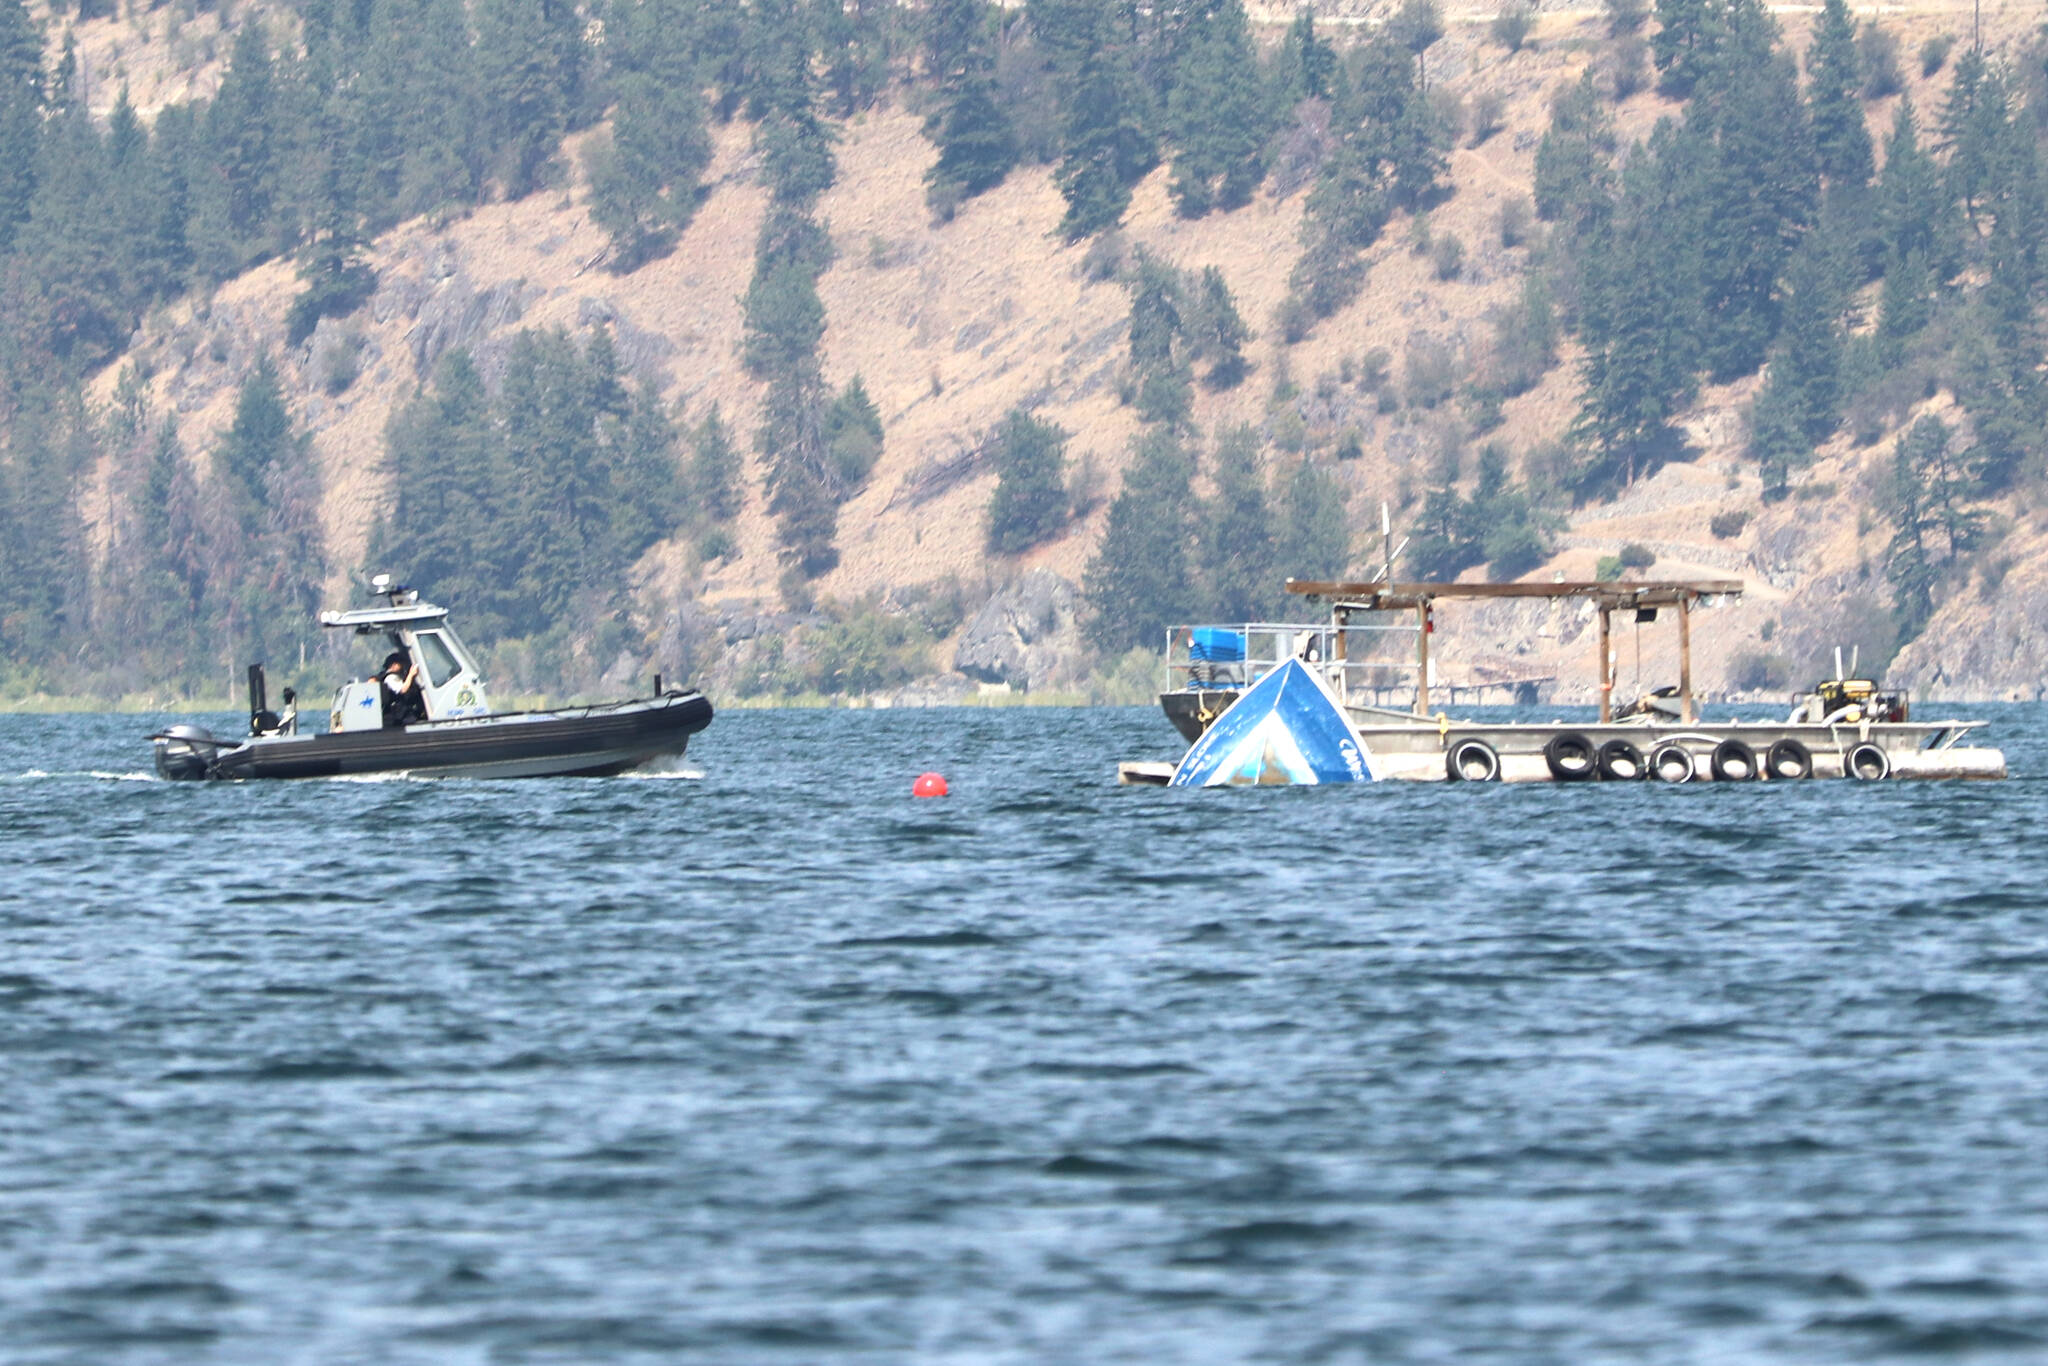 An RCMP boat circles the wreckage of a commercial fishing boat in Okanagan Lake, where the captain has not resurfaced or been found since overturning Monday, July 24. (Jennifer Smith - Morning Star)